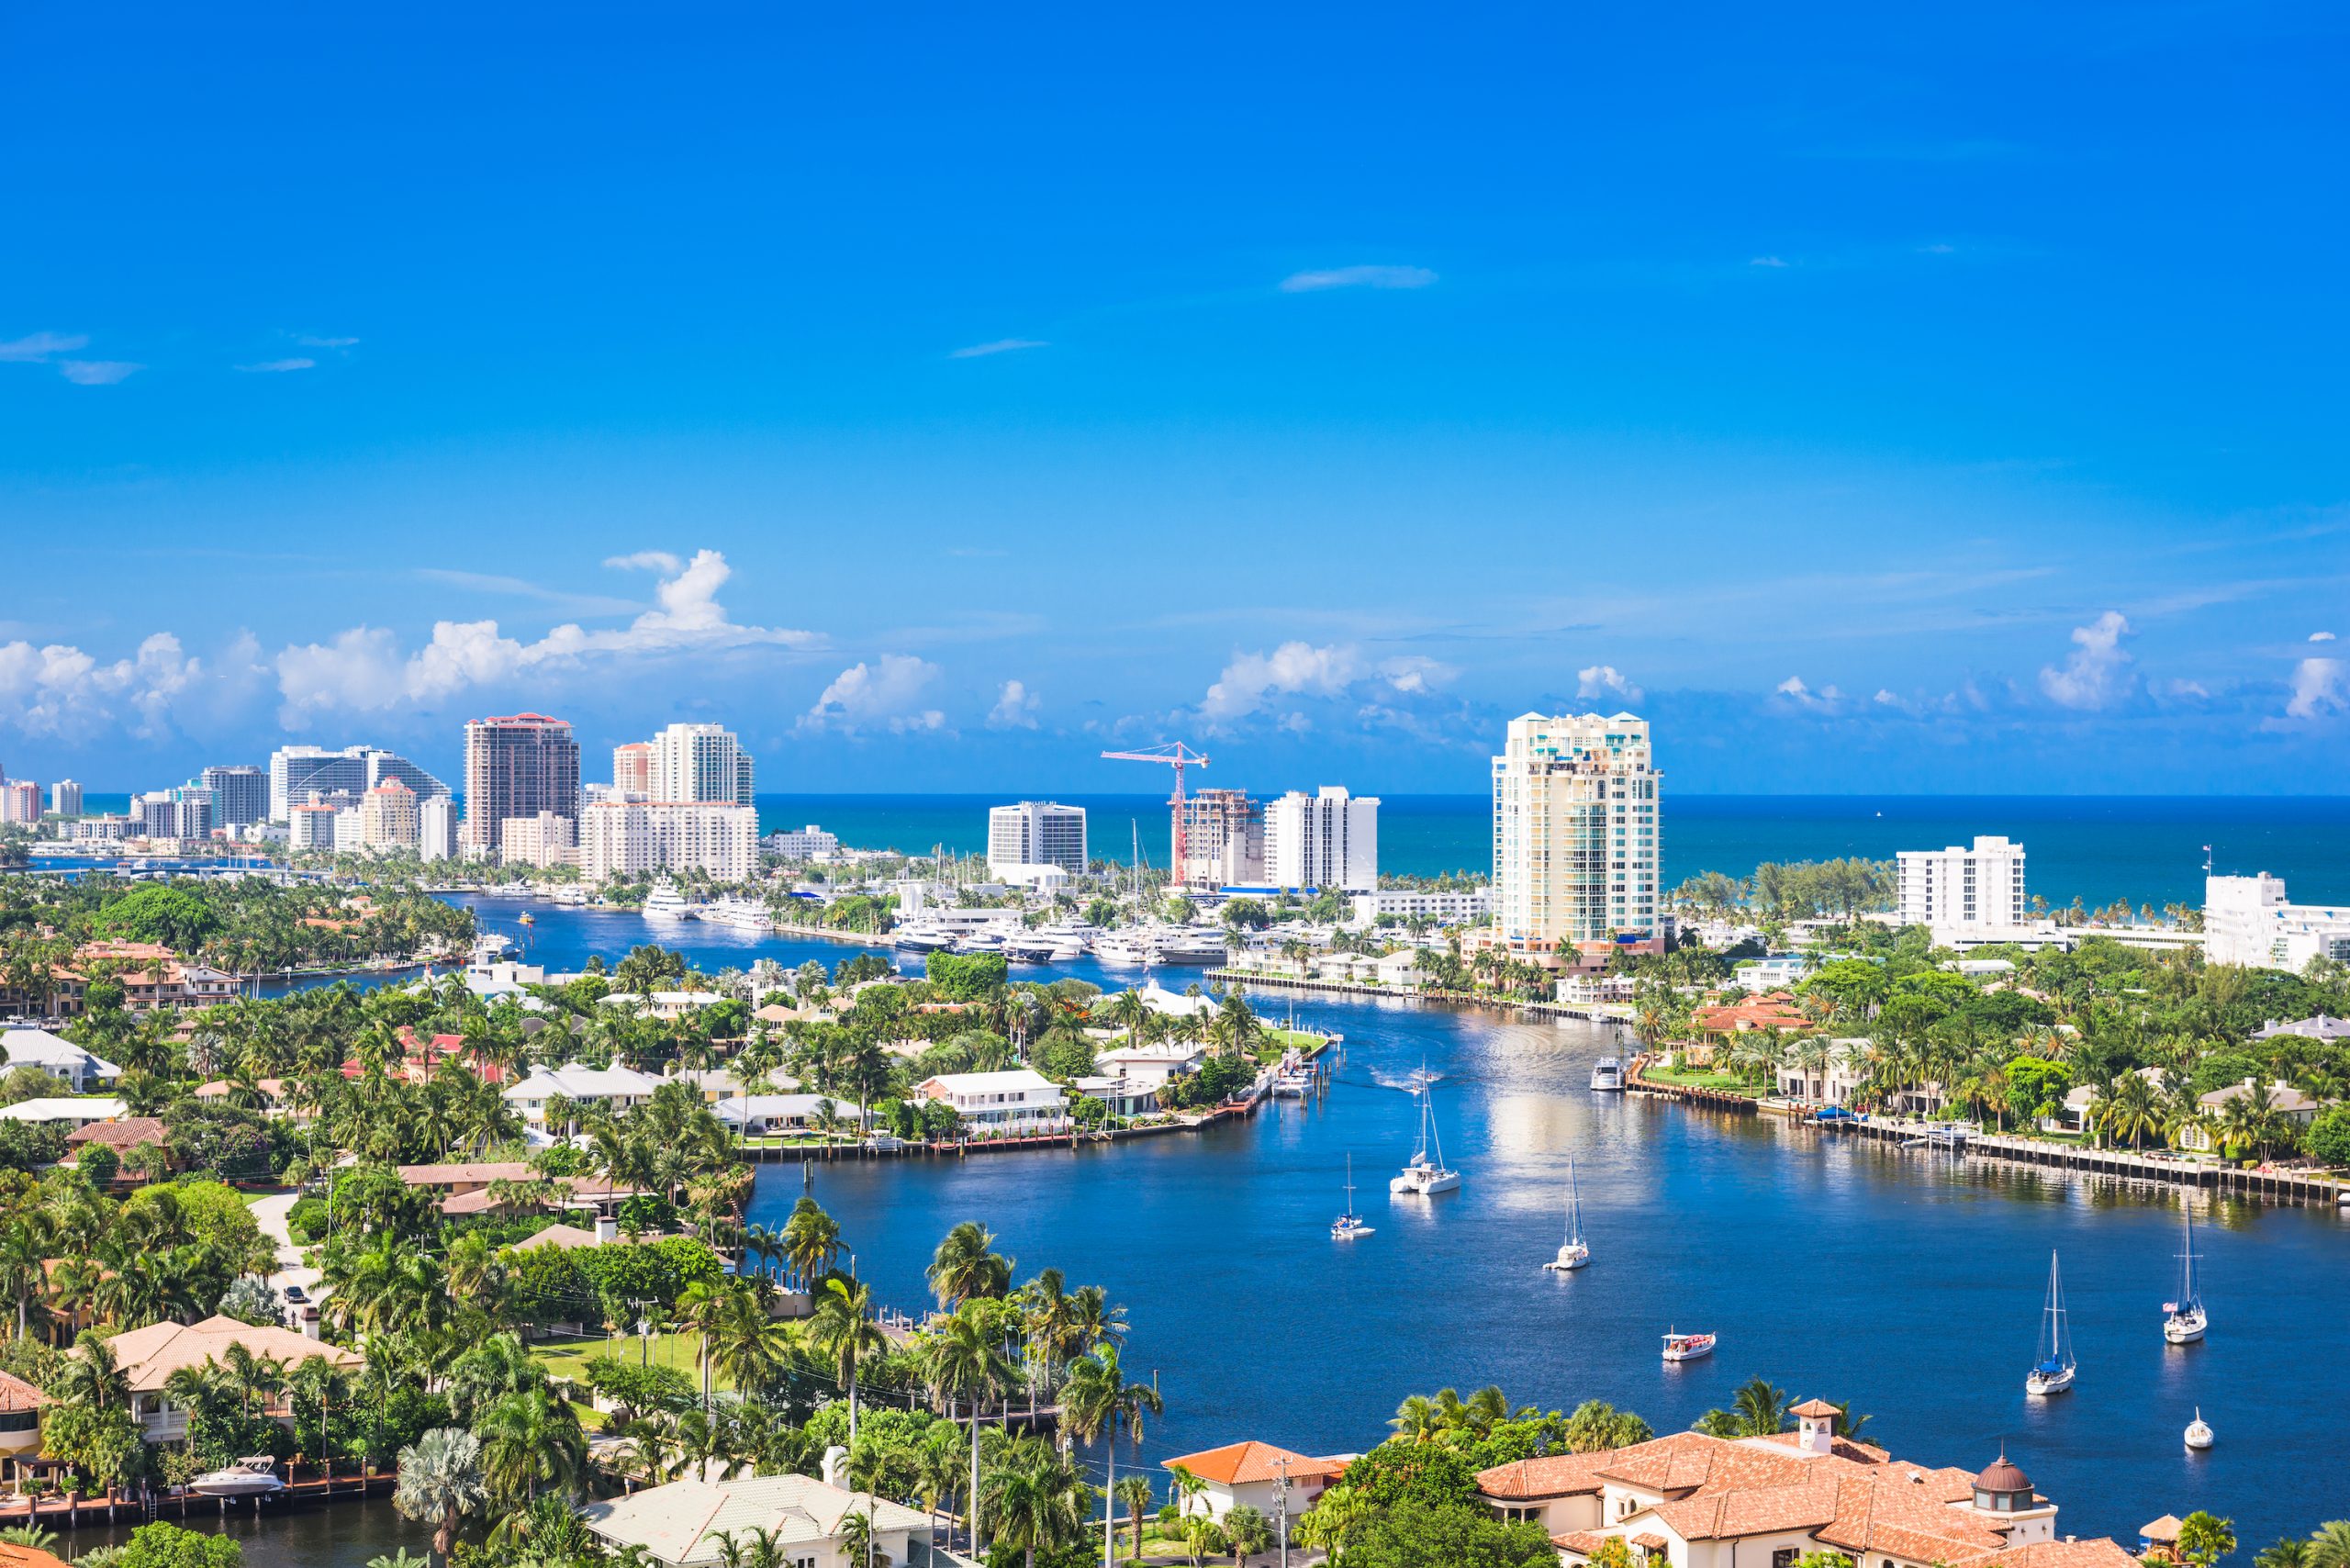 Save on Fort Lauderdale Summer Travel With 'LauderDeals